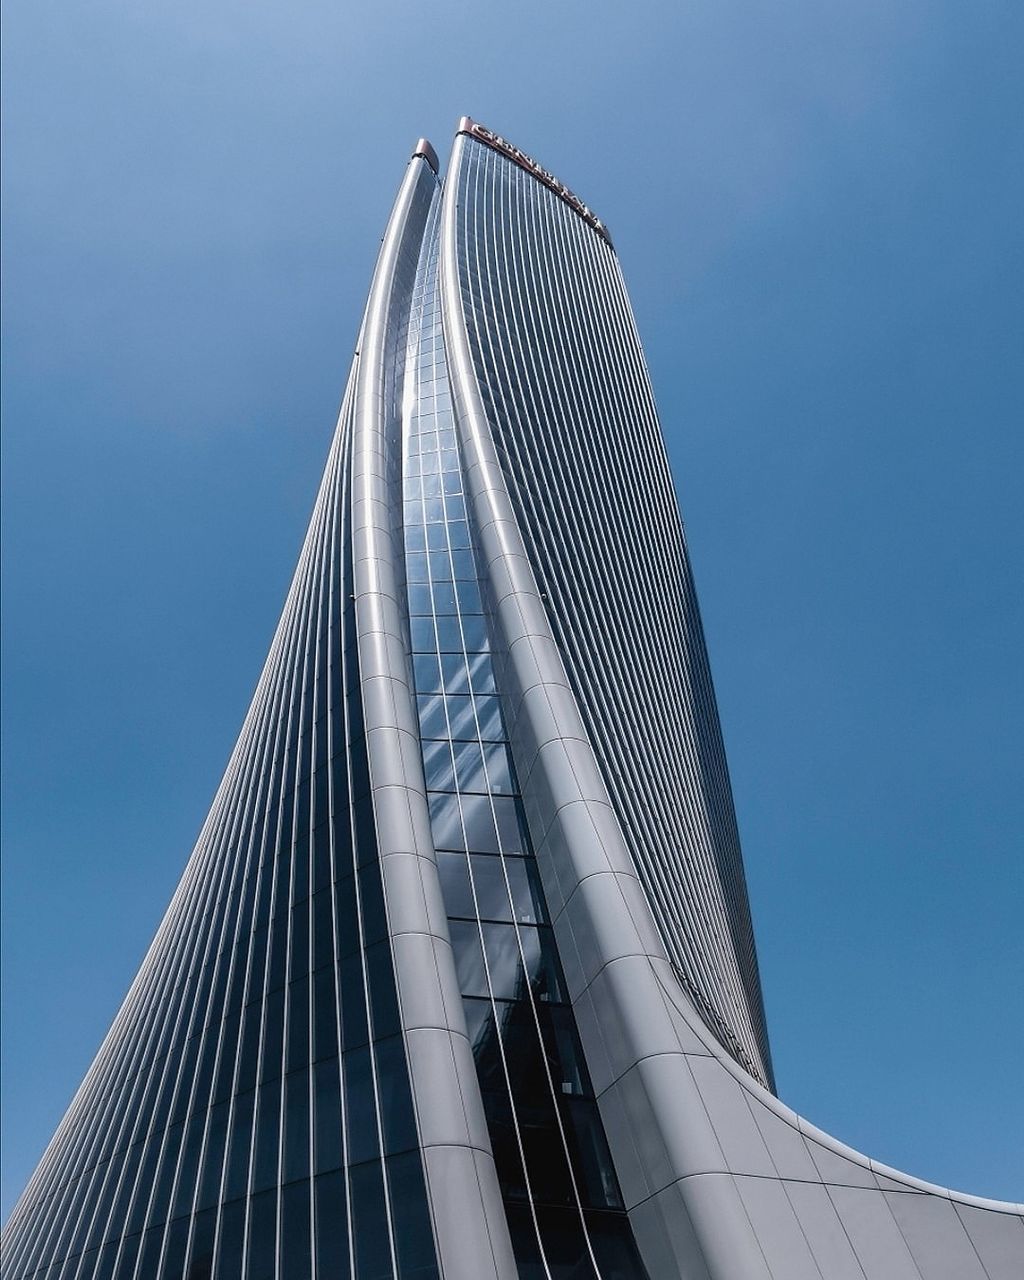 sky, architecture, low angle view, built structure, building exterior, clear sky, modern, office building exterior, no people, nature, city, day, skyscraper, tall - high, building, travel destinations, tower, sunlight, outdoors, luxury